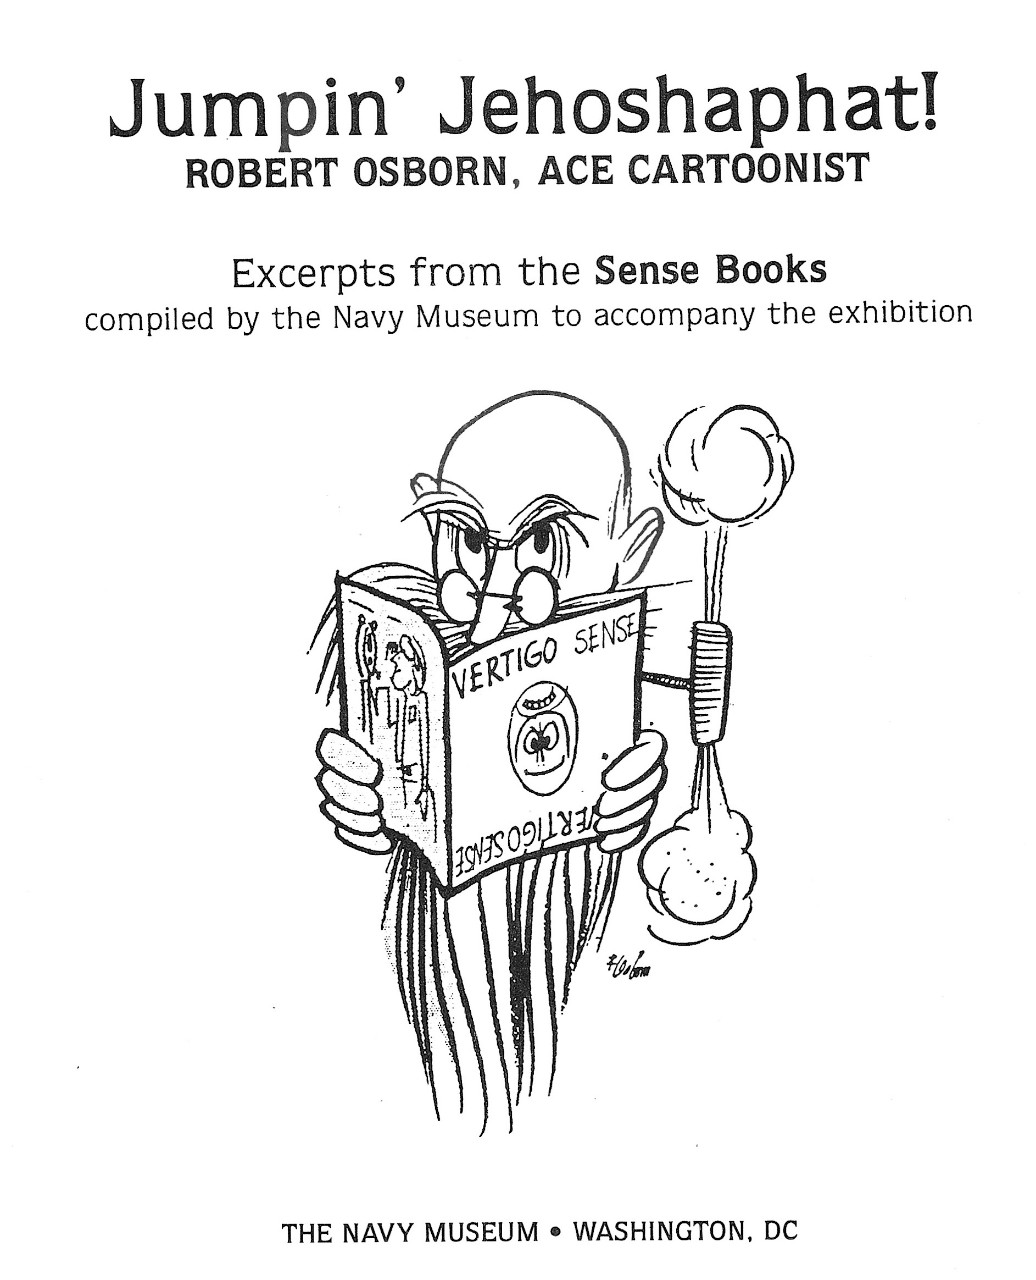 Jumpin’ Jehoshapat!, Robert Osborn, Ace Cartoonist. Excerpts from Sense books, compiled by the Navy Museum to accompany the exhibition. National Museum of the U.S. Navy Curator Archives Collection.